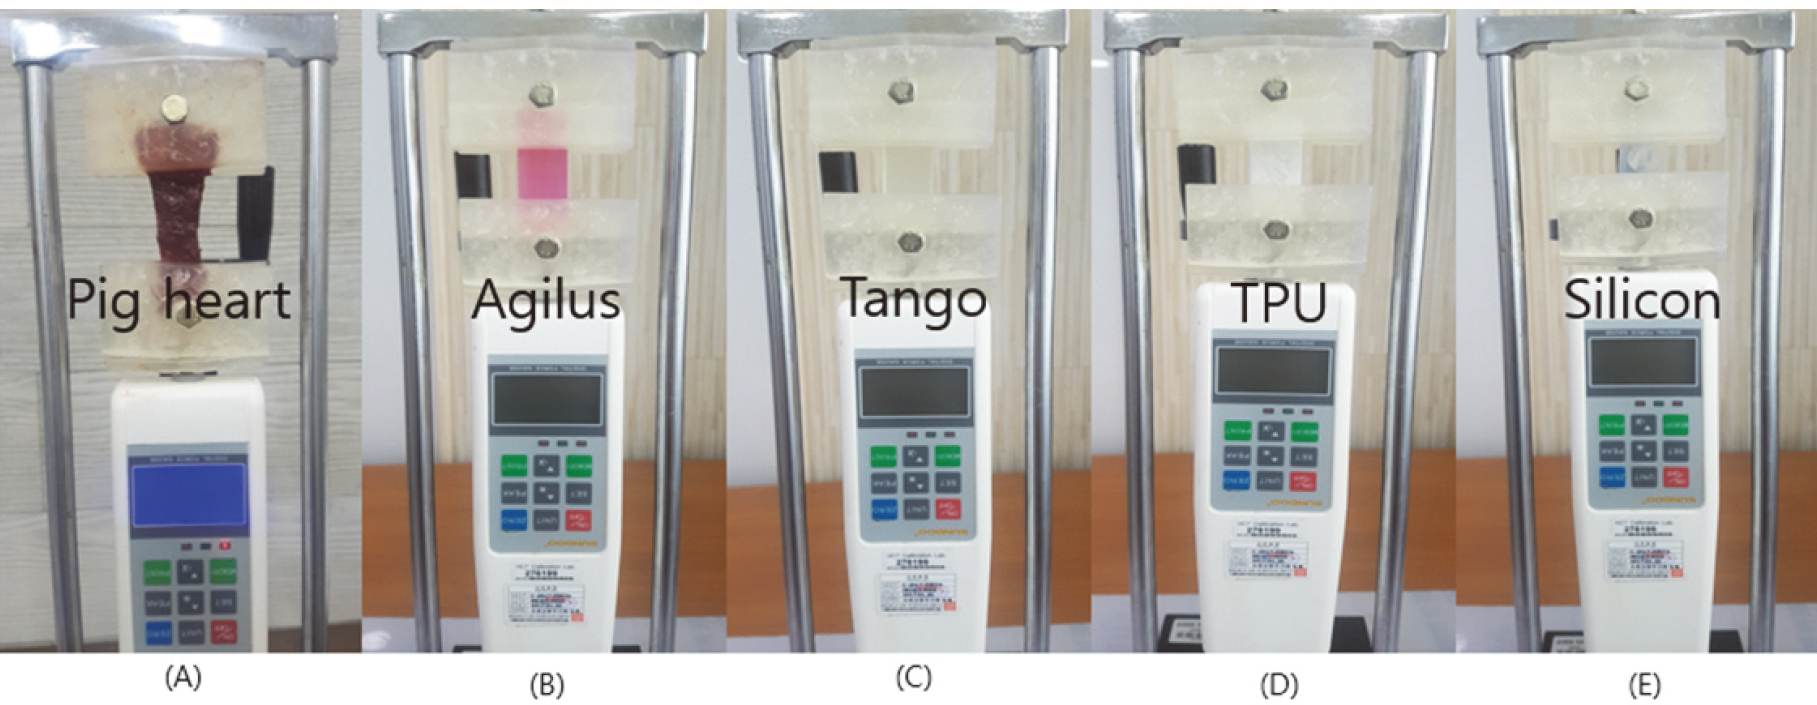 Measure the change in length using a force of 5N (A) Pig heart elasticity experiment (B) Agilus elasticity experiment (C) Tango elasticity experiment (D) TPU elasticity experiment (E) Silicone elasticity experiment.